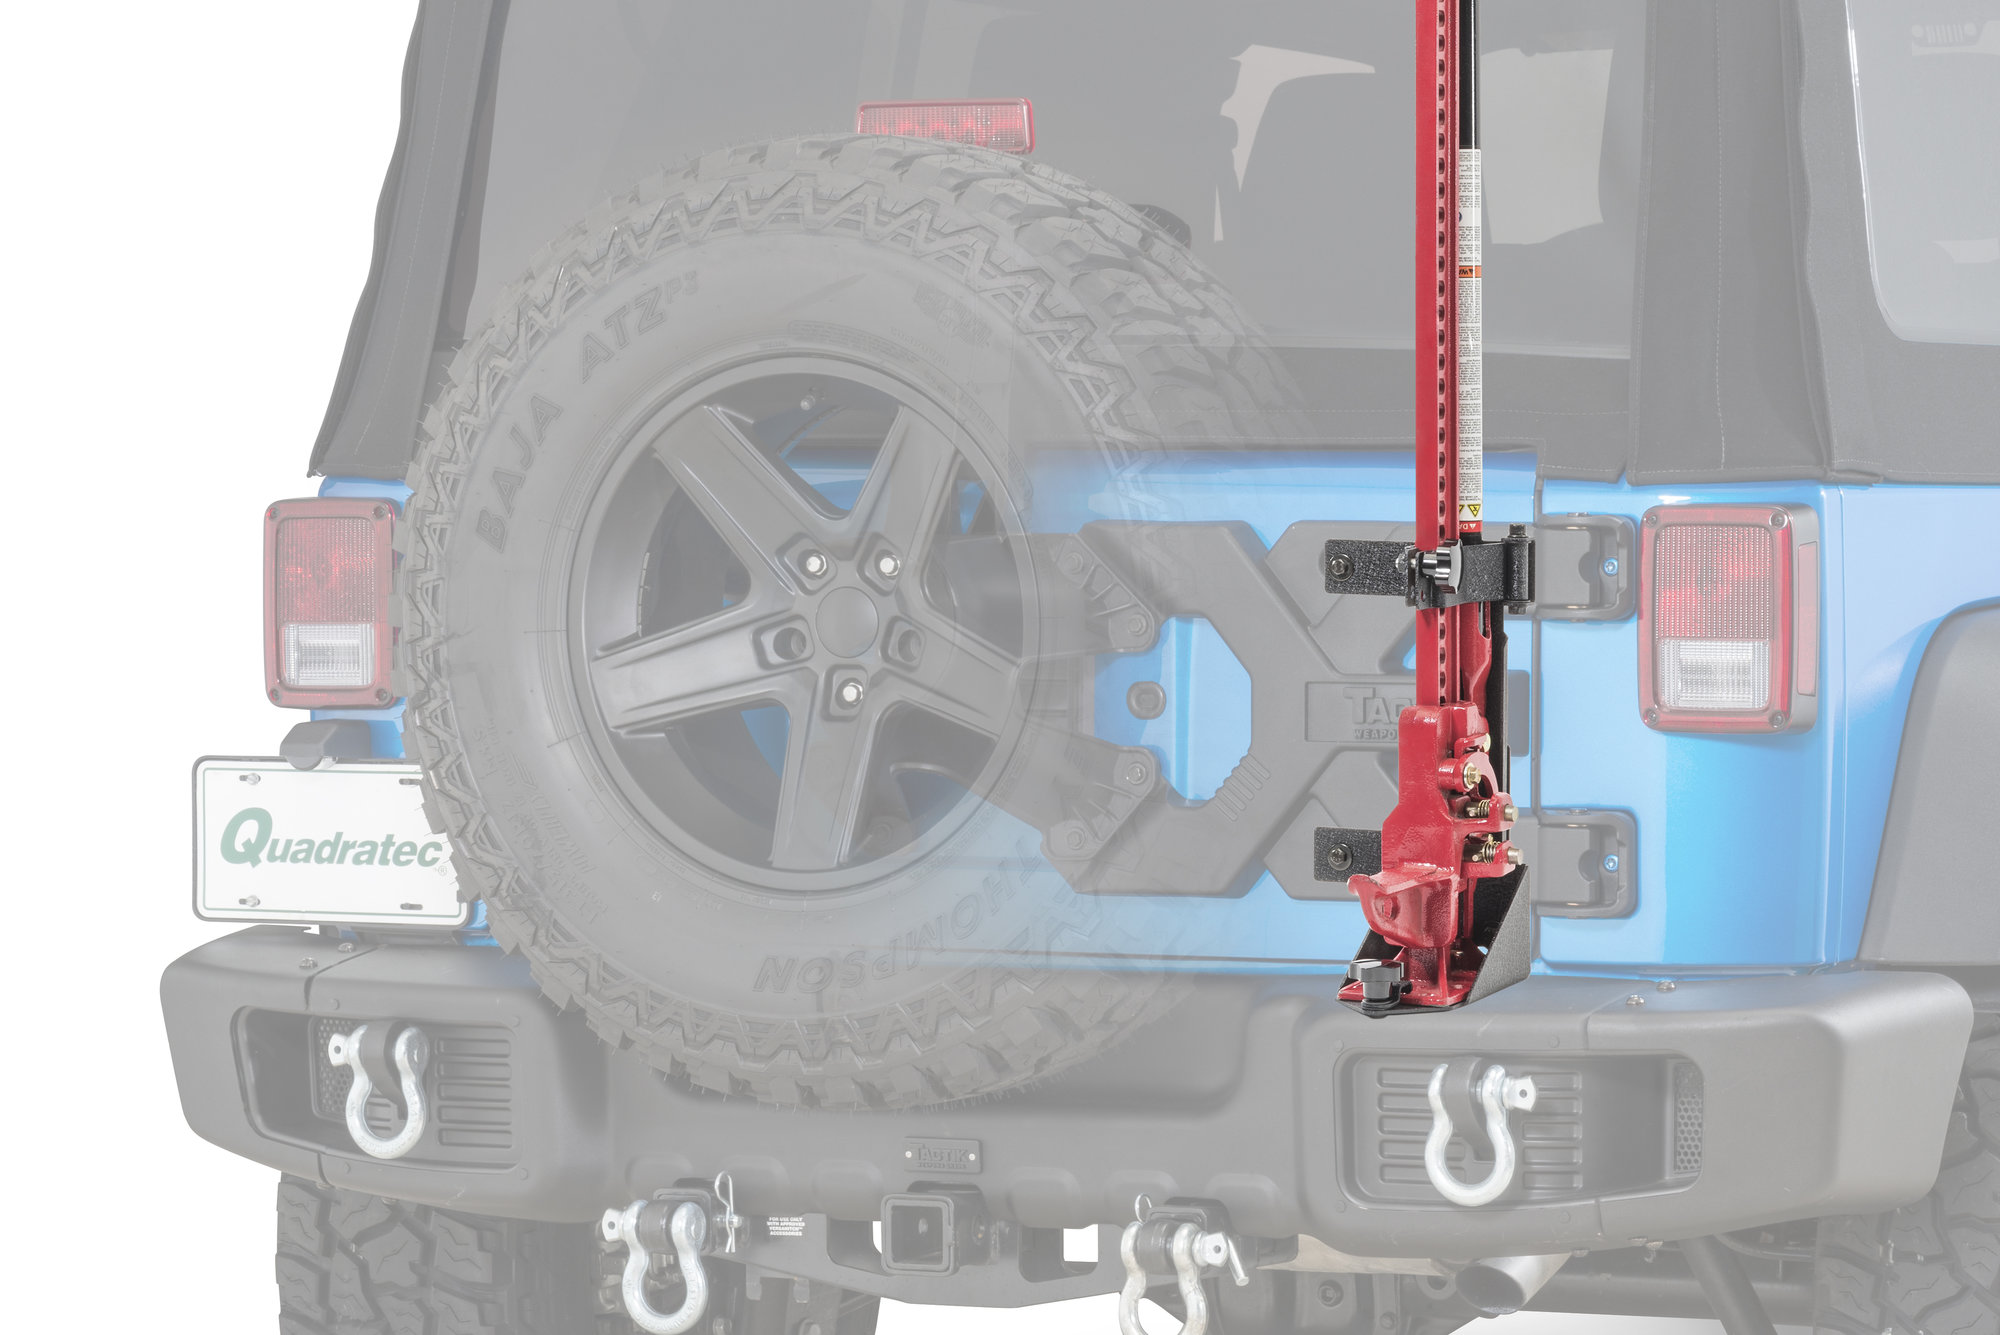 How to Install Rugged Ridge 2 in. Receiver Hitch Kit w/ Wiring Harness &  Jeep Logo Hitch Plug (07-18 Wrangler JK) on your Jeep Wrangler |  ExtremeTerrain